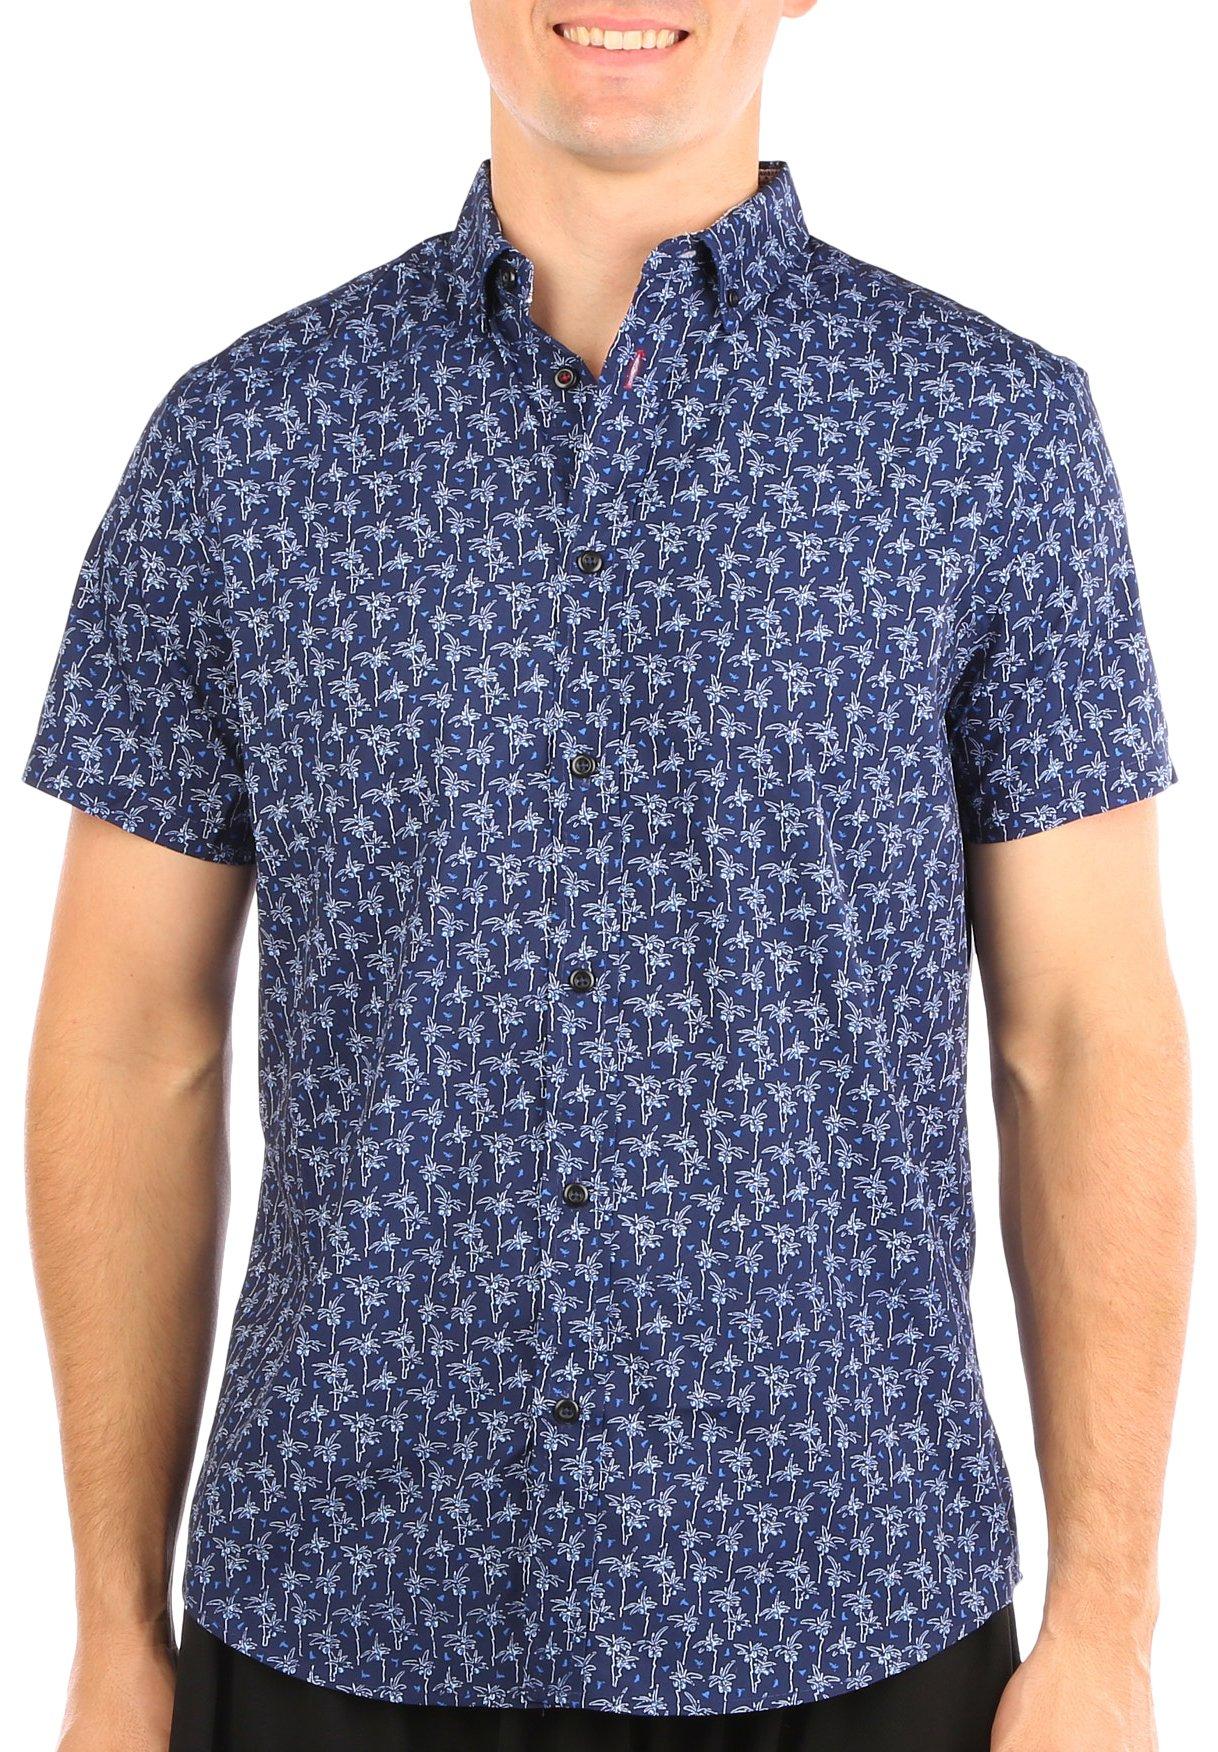 Mens 4-Way Stretch Palm Tree Button-Up Short Sleeve